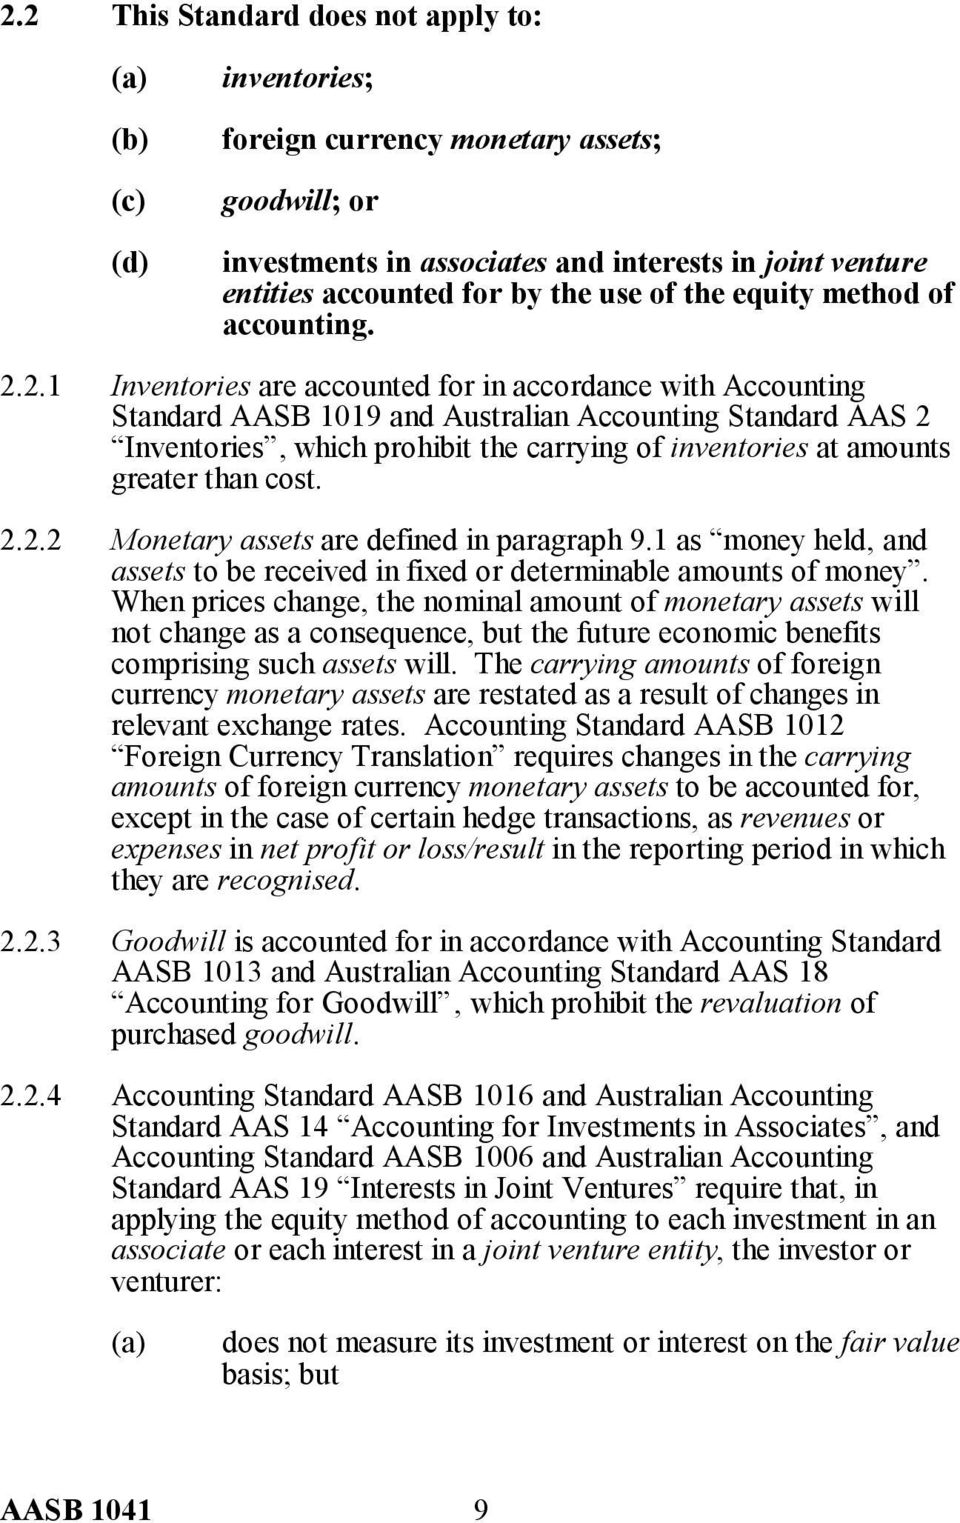 2.1 Inventories are accounted for in accordance with Accounting Standard AASB 1019 and Australian Accounting Standard AAS 2 Inventories, which prohibit the carrying of inventories at amounts greater